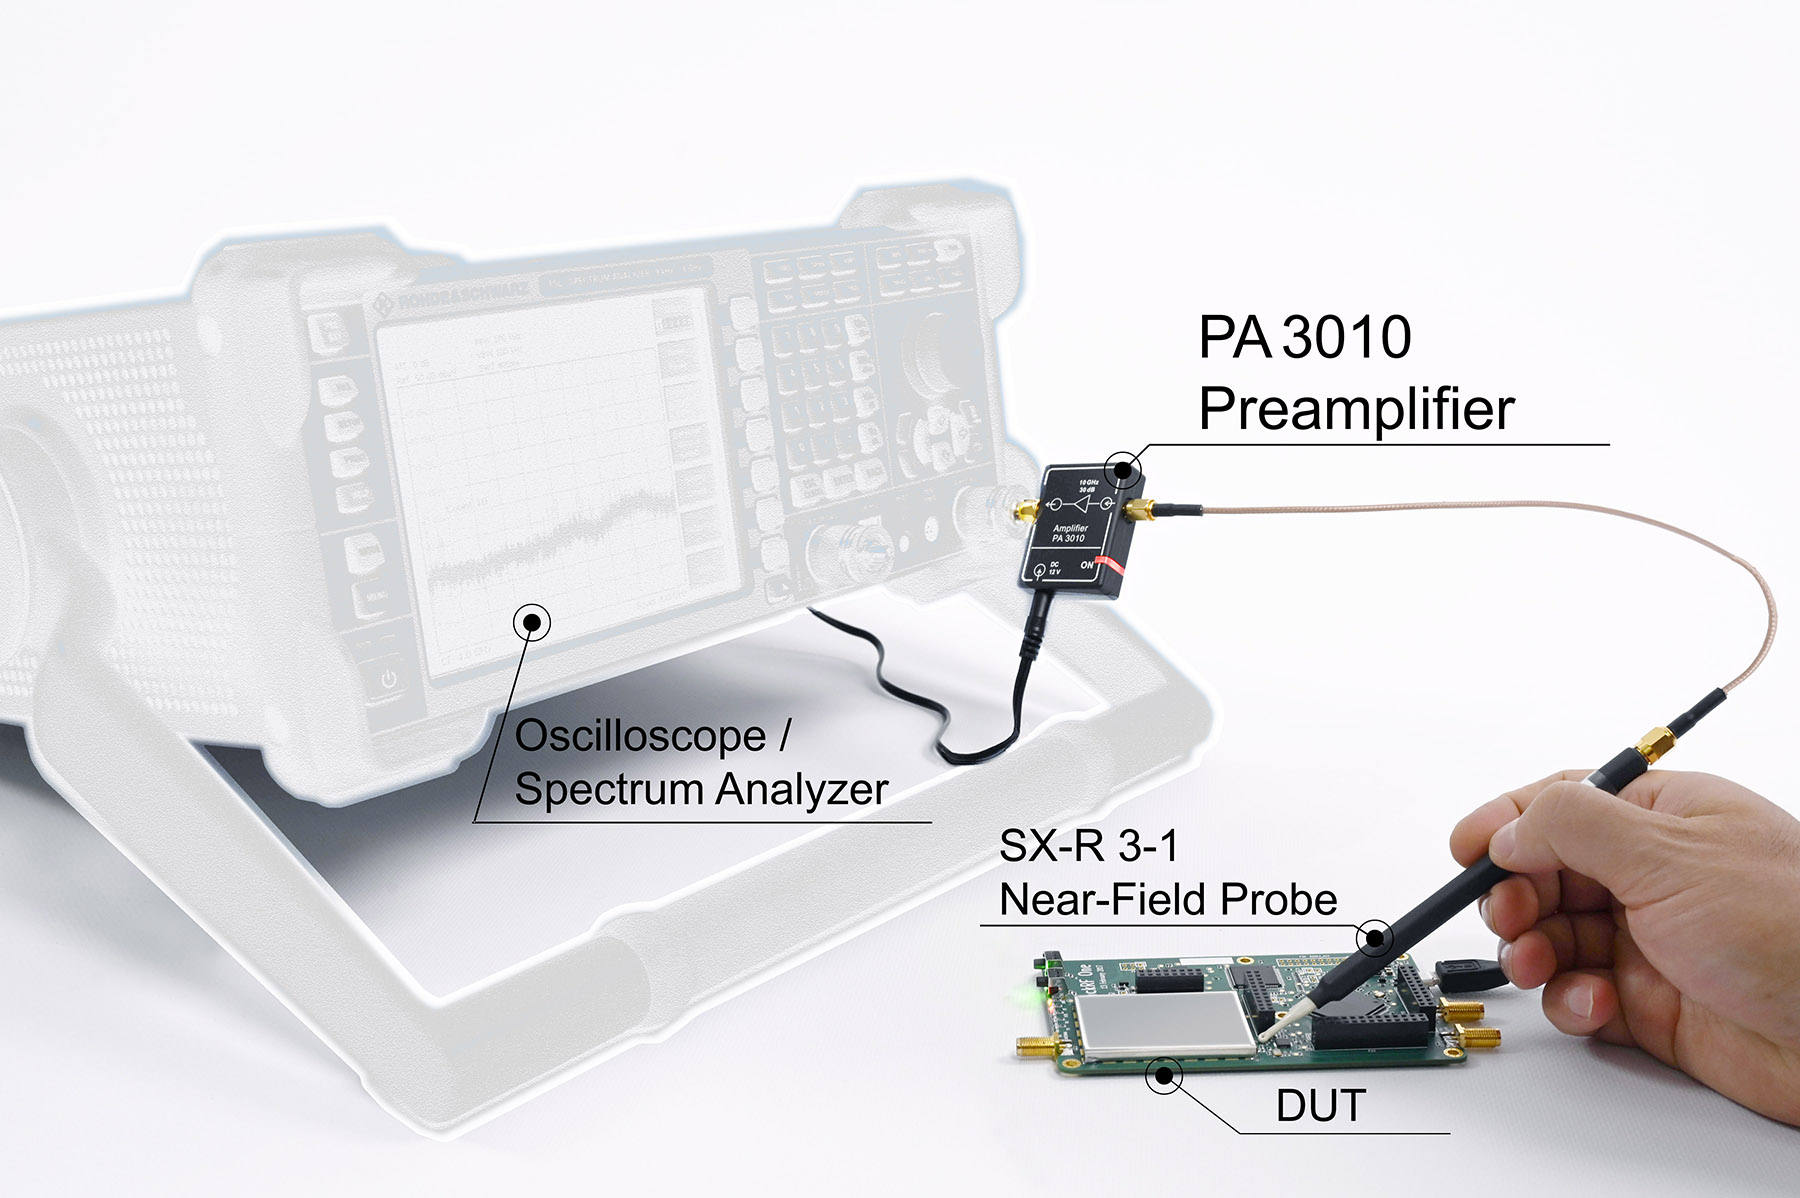 Measurement with PA 3010